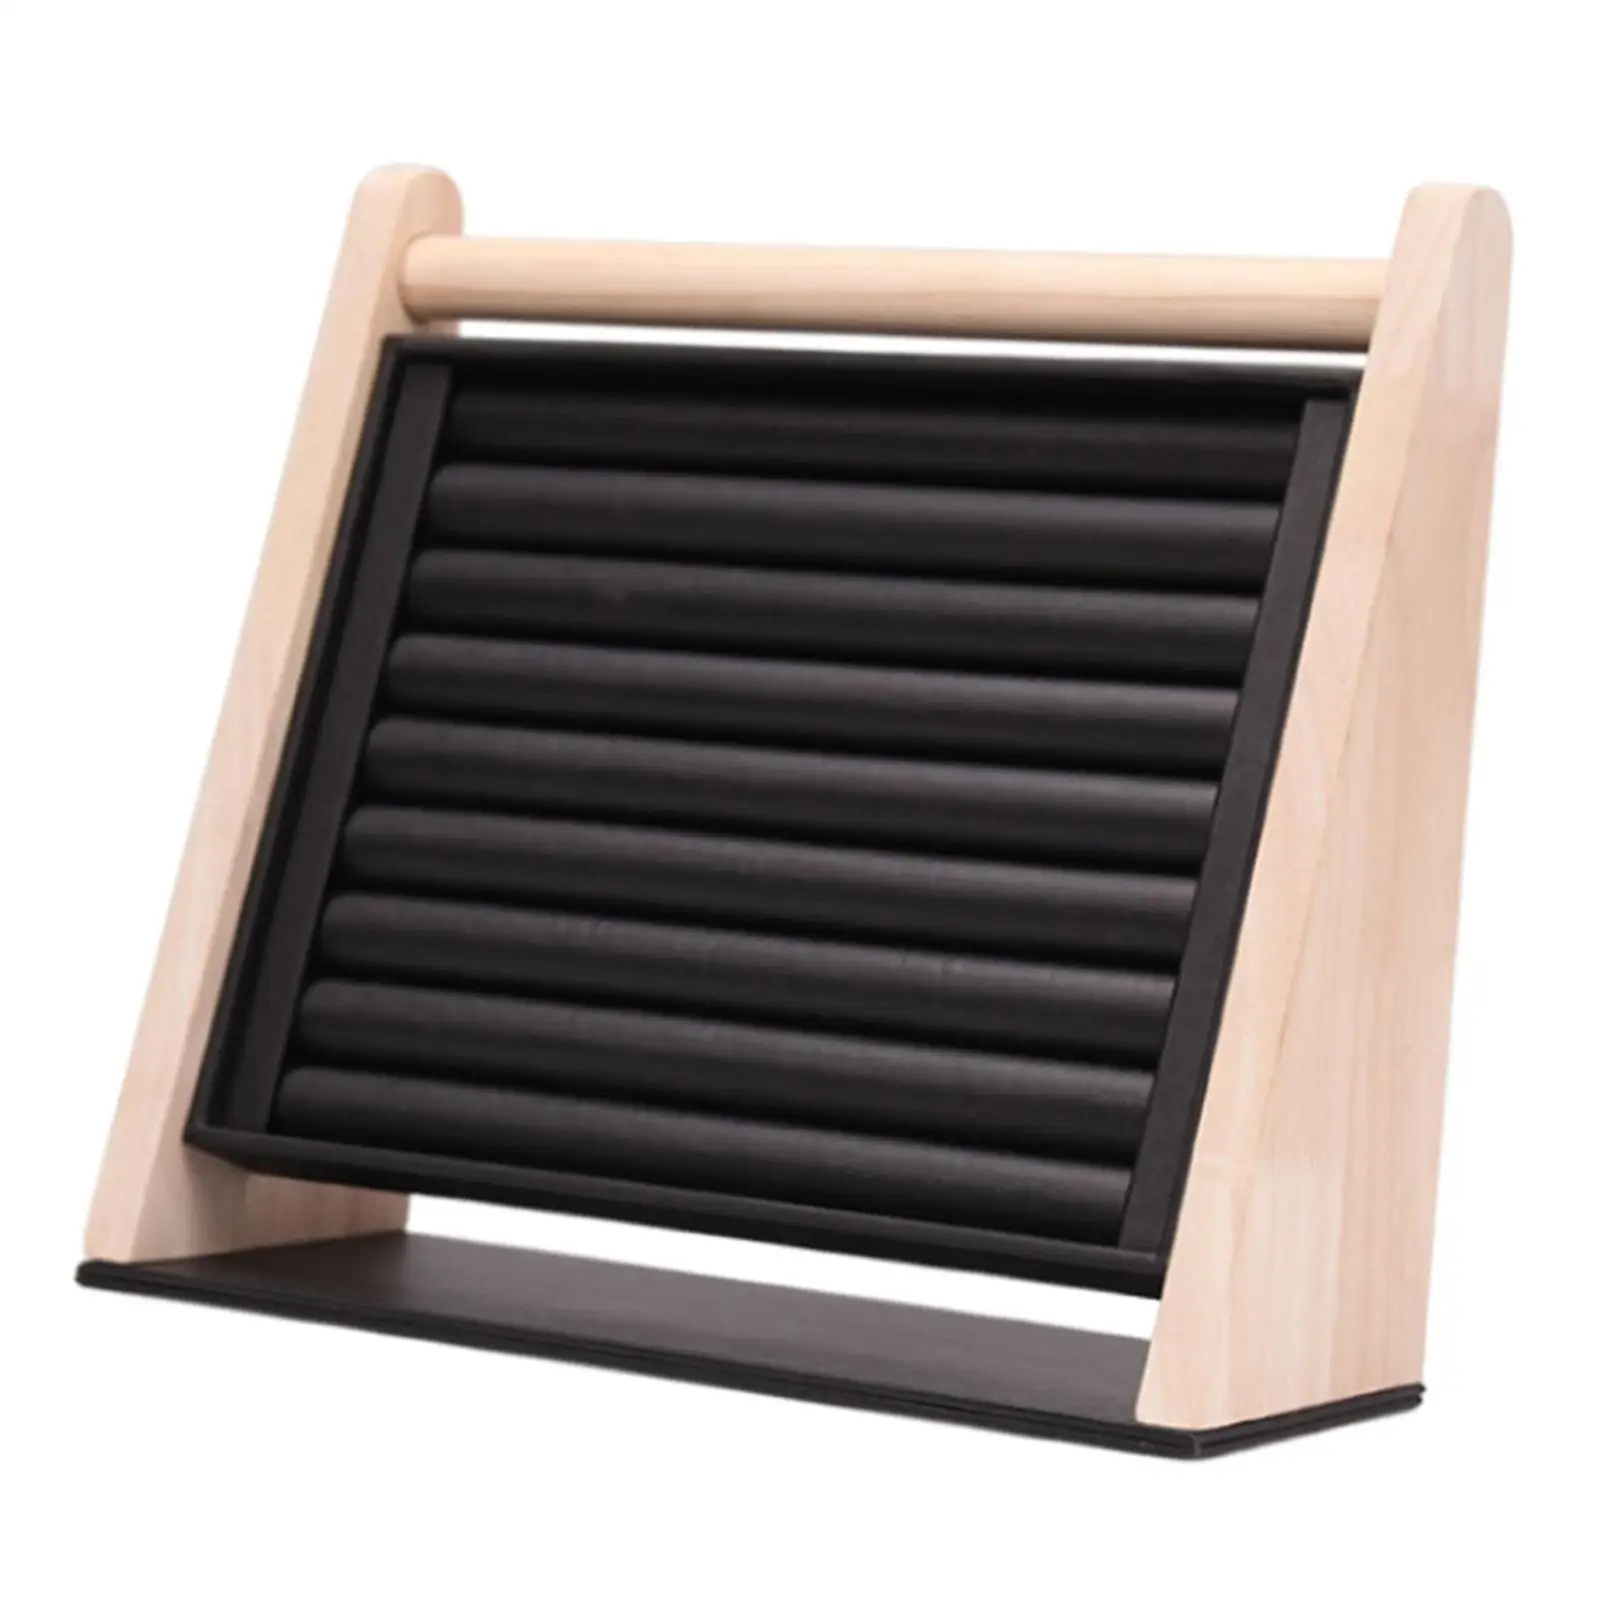 Rings Display Stand Tray Wood Large Capacity Vertical 9 PU Leather Slots Inserts Display for Rings Earrings Necklaces Studs Show